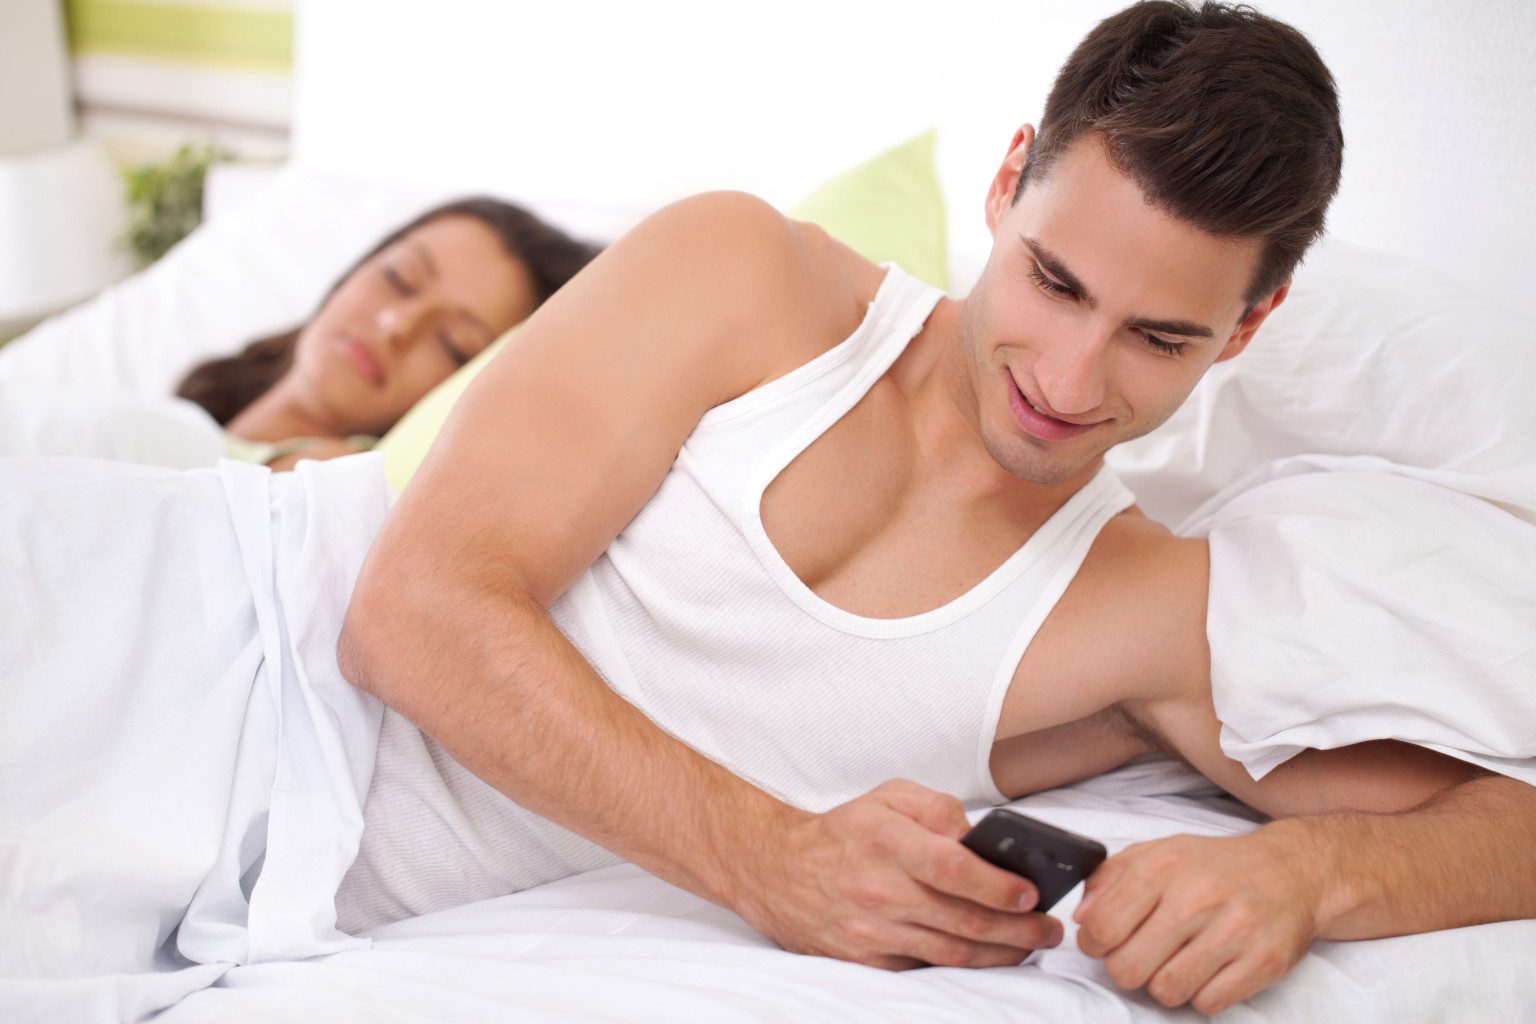 Cheating his wife, young men chatting with his mistress while his wife sleeps; Shutterstock ID 111366542; PO: The Huffington Post; Job: The Huffington Post; Client: The Huffington Post; Other: The Huffington Post